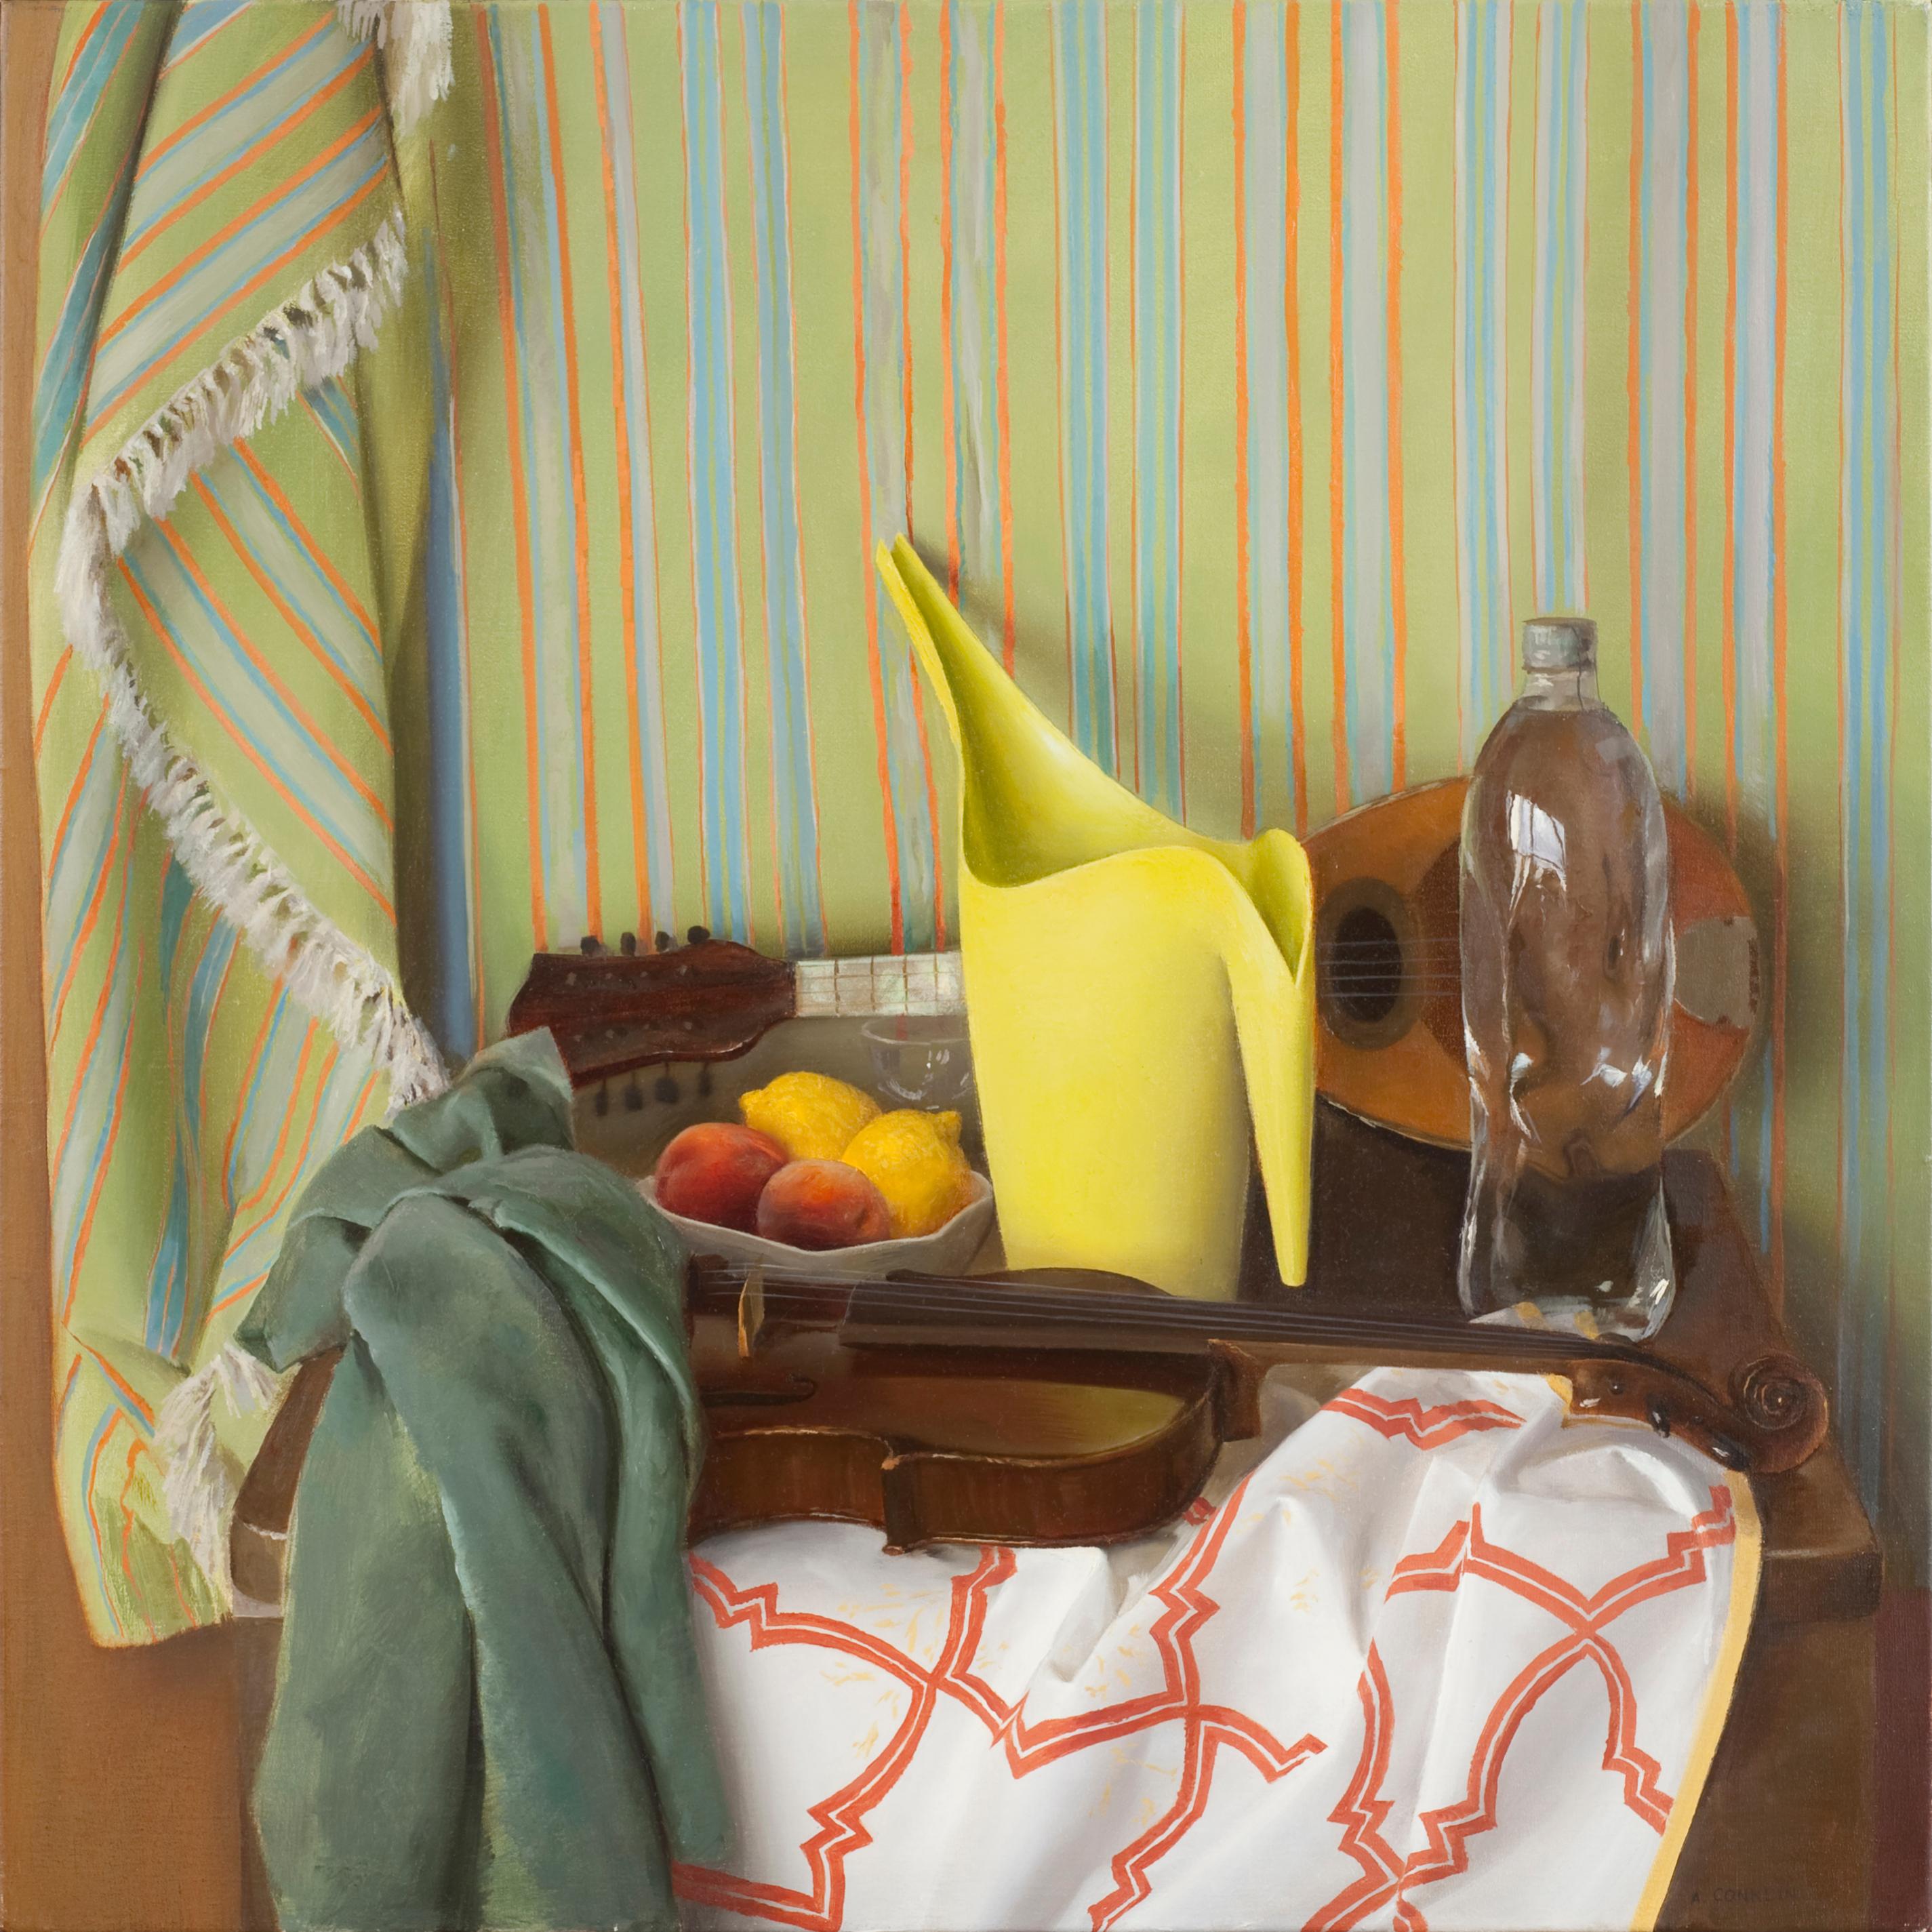 This still life painting on canvas captures a variety of objects. Among the objects depicted are: Guitar, violin, bowl of peaches and lemons, Ikea pitcher, bottled water, and a printed fabric background. These masterfully painted objects create a